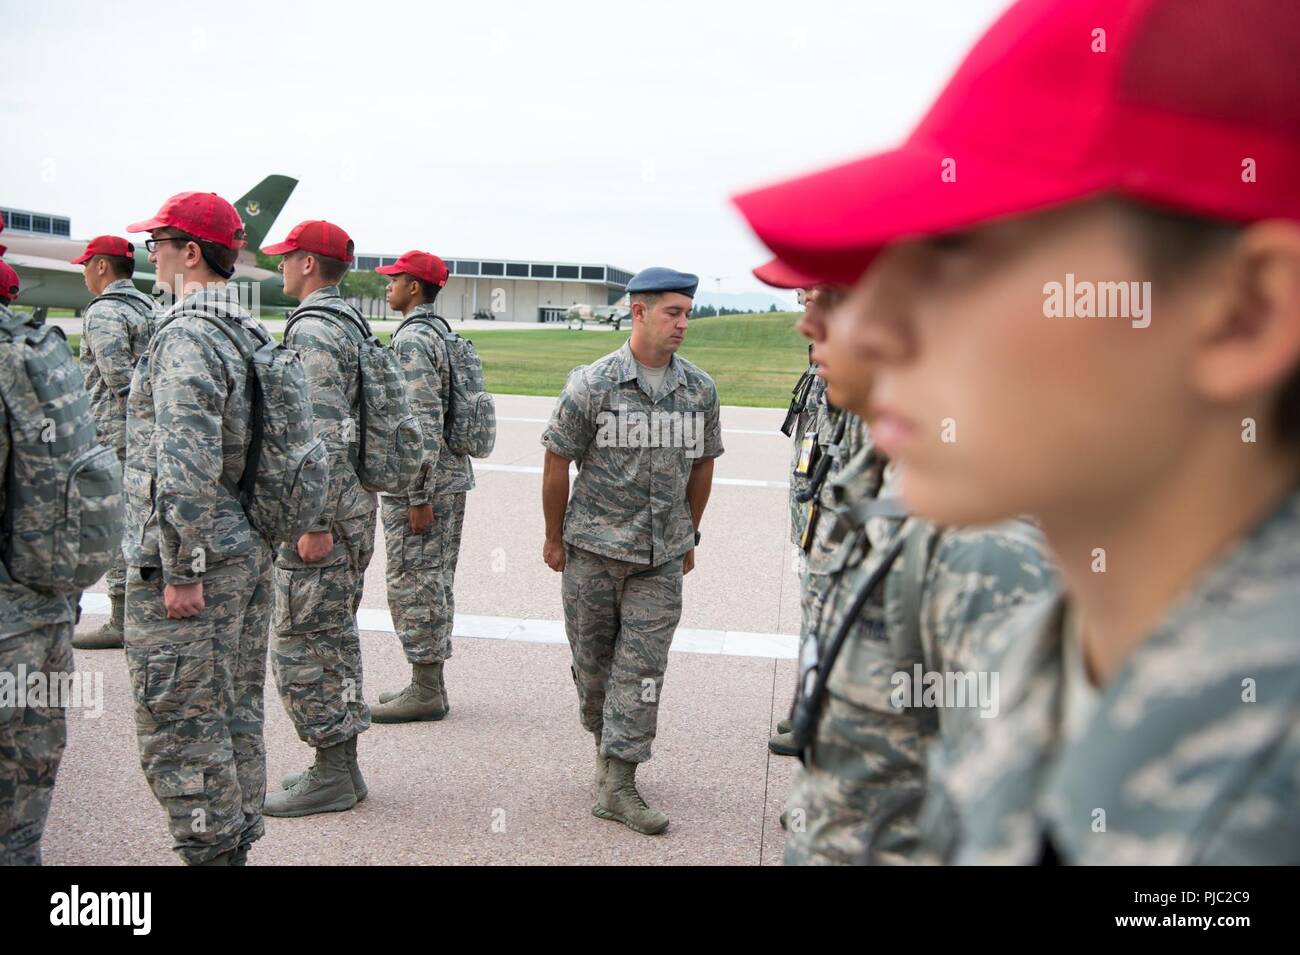 U.S. Air Force Academy -- Cadets 1st Class William Botterbusch and Liam Sax perform open ranks inspection on basic cadets, Jul. 20, here. Stock Photo